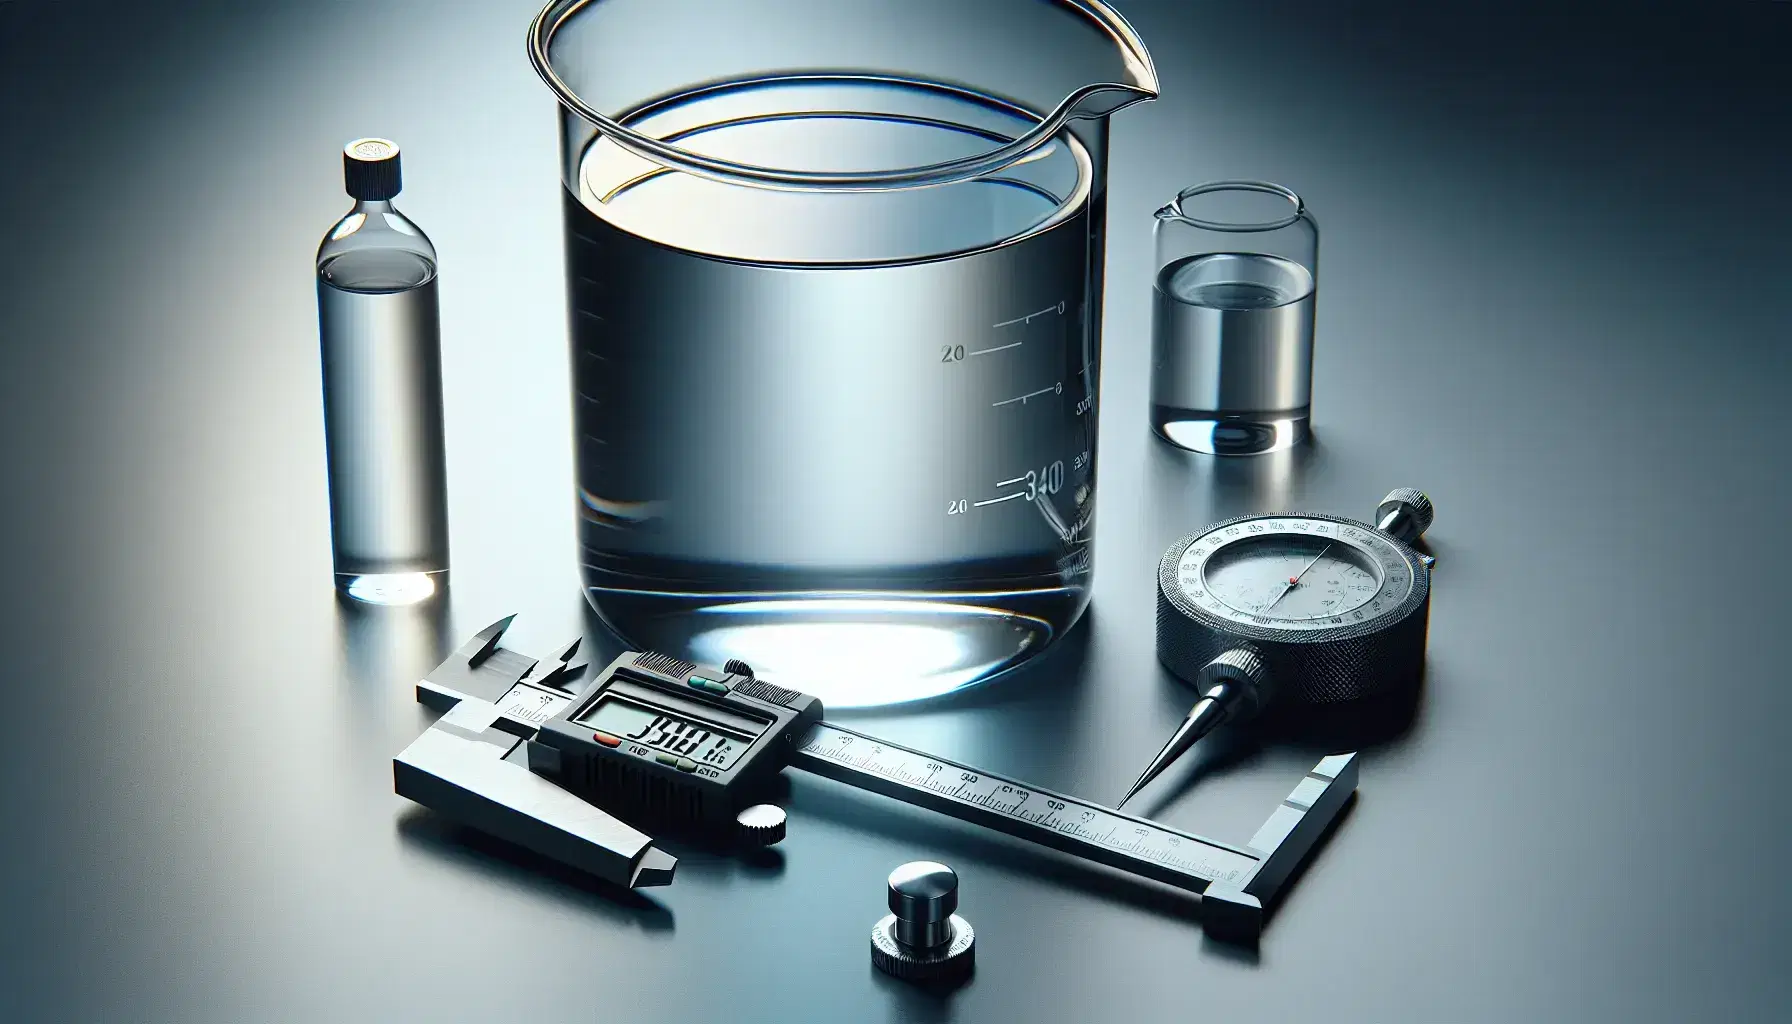 Precision measurement tools including a stainless steel Vernier caliper, a glass beaker with liquid, and a digital stopwatch on a gray surface.